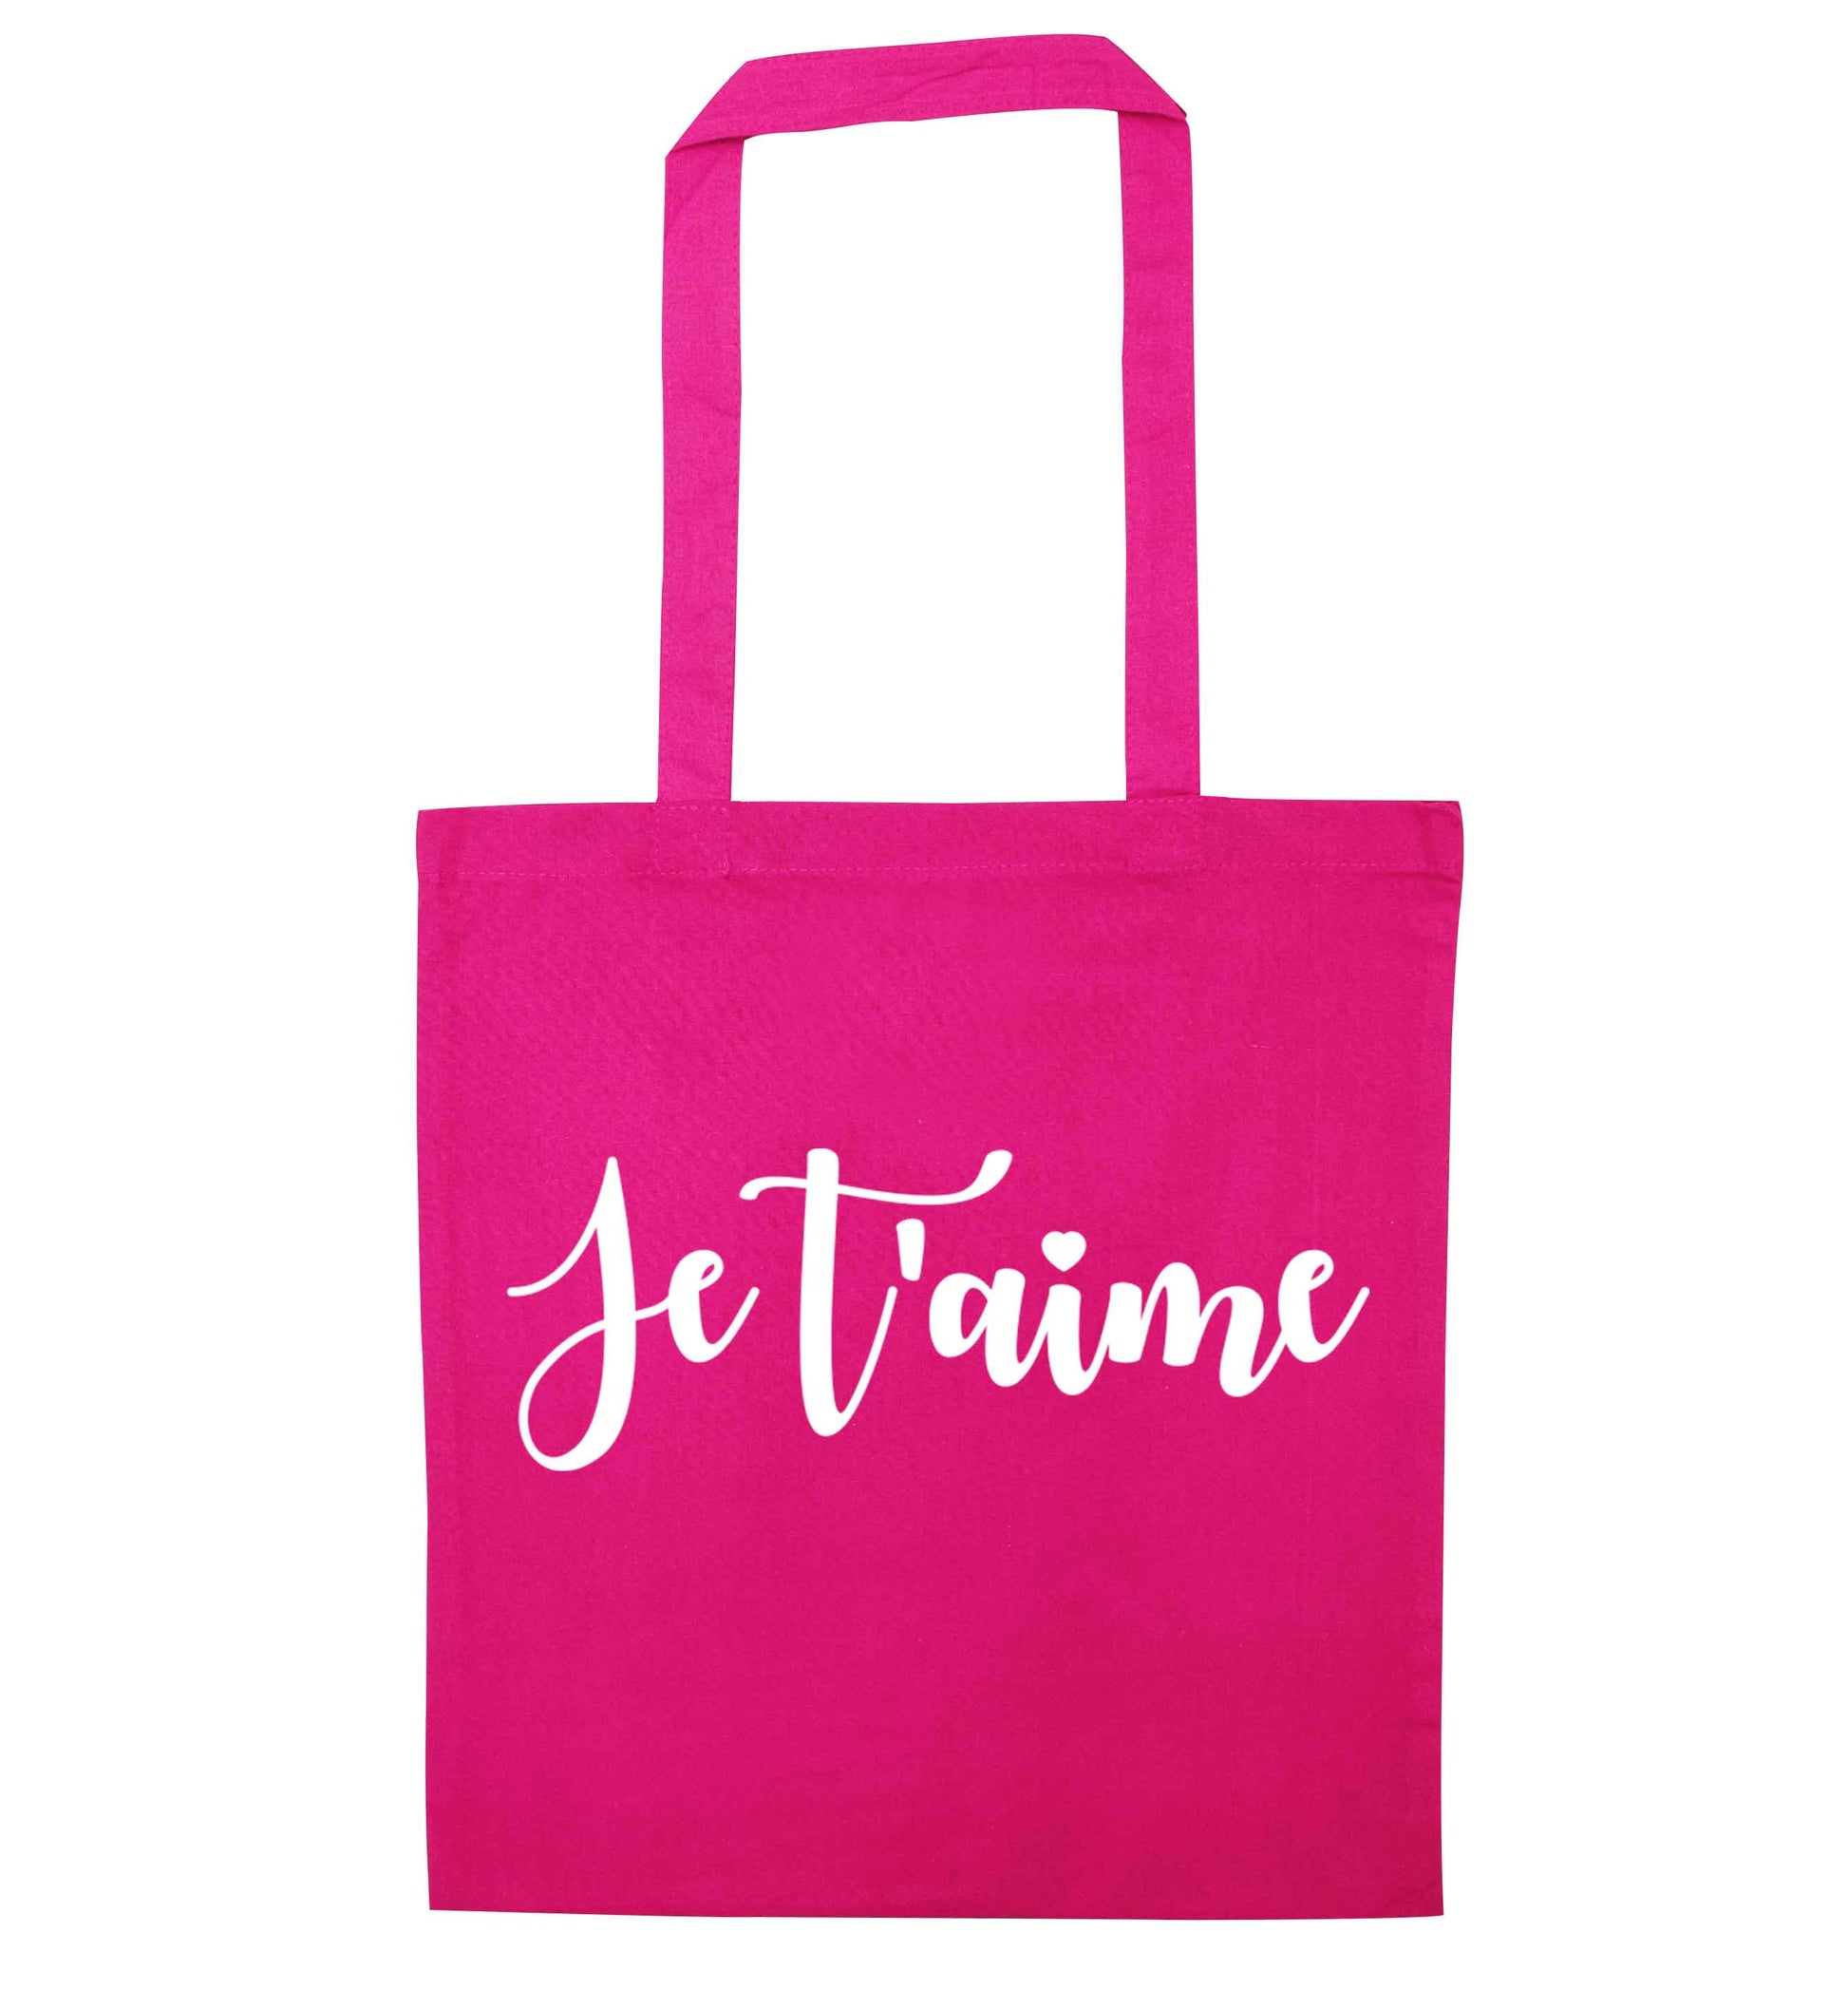 Je t'aime pink tote bag